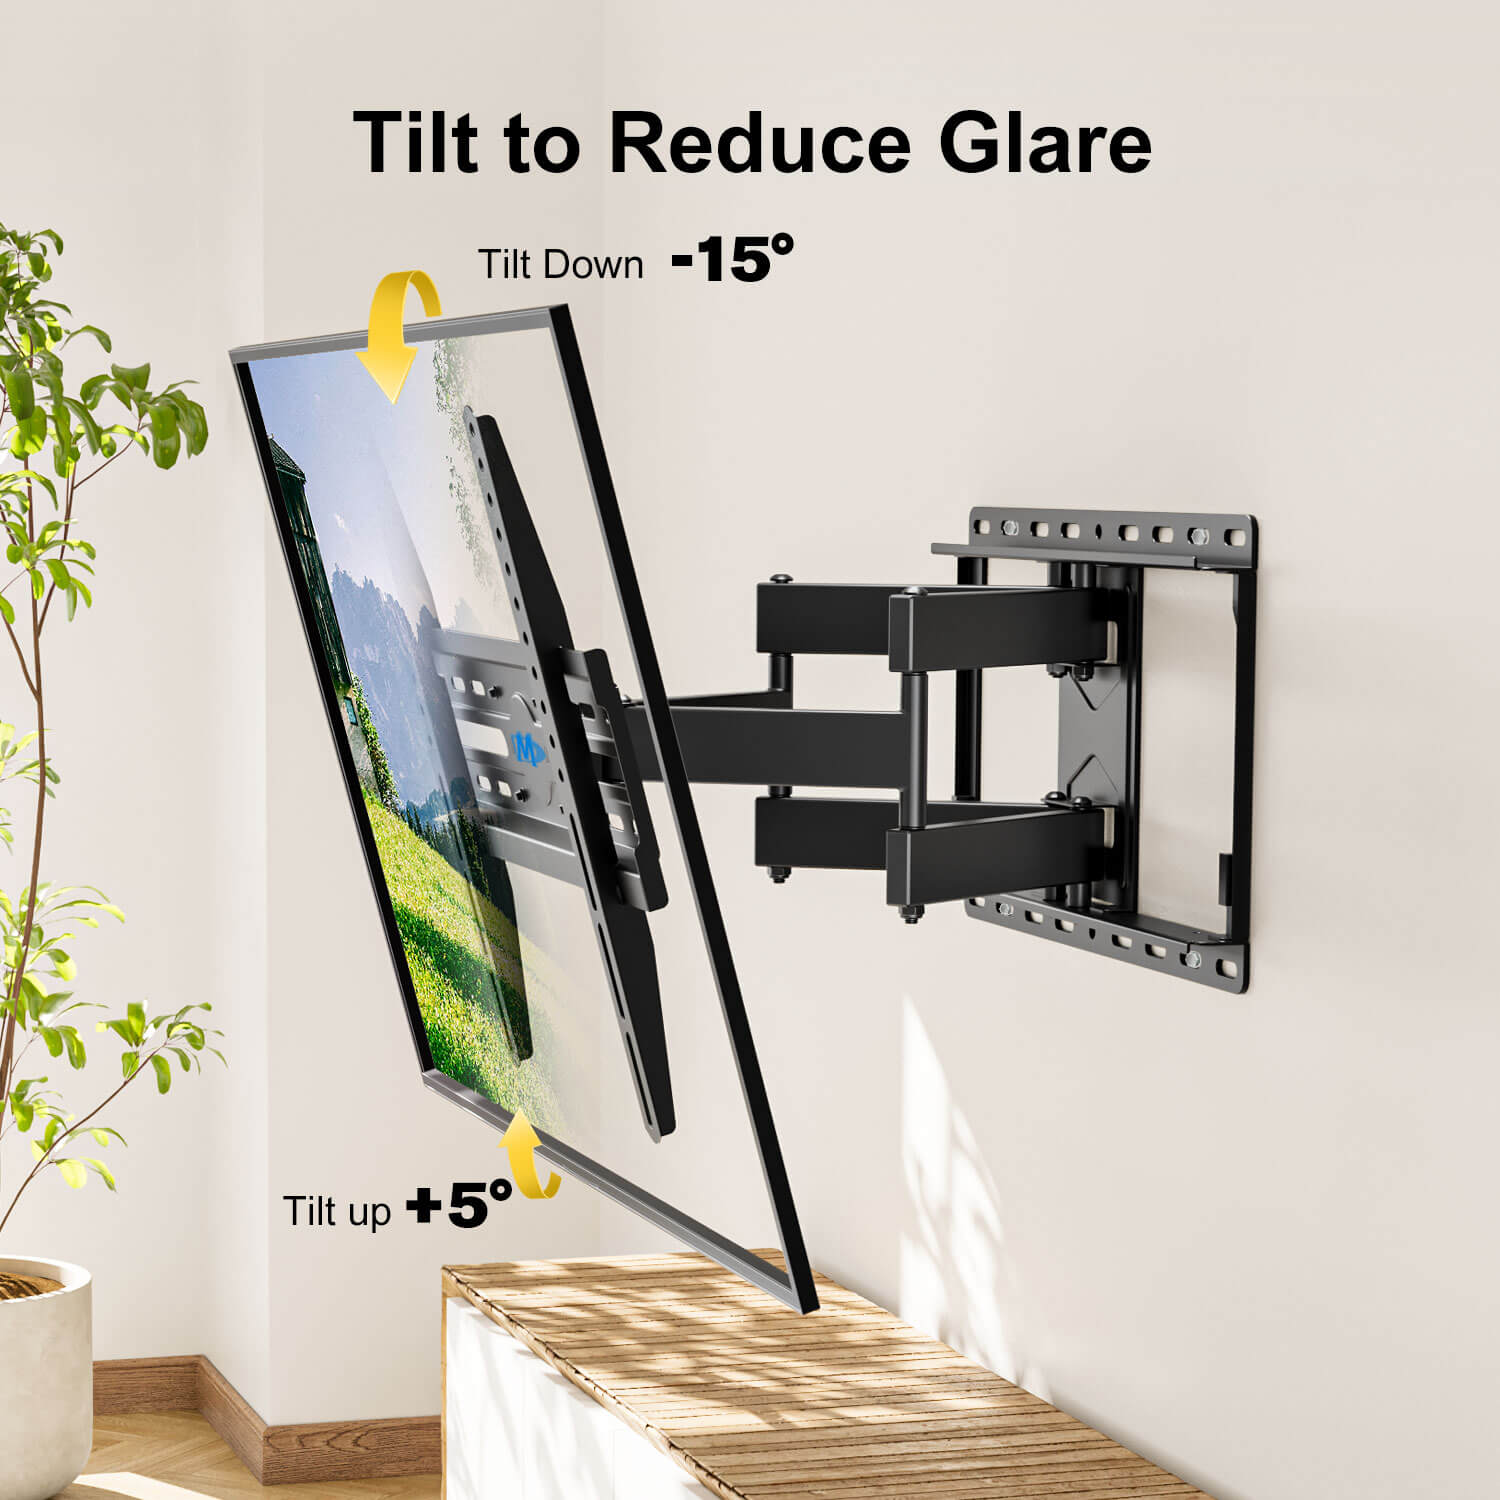 full motion tv mount tilts the TV for comforttable viewing